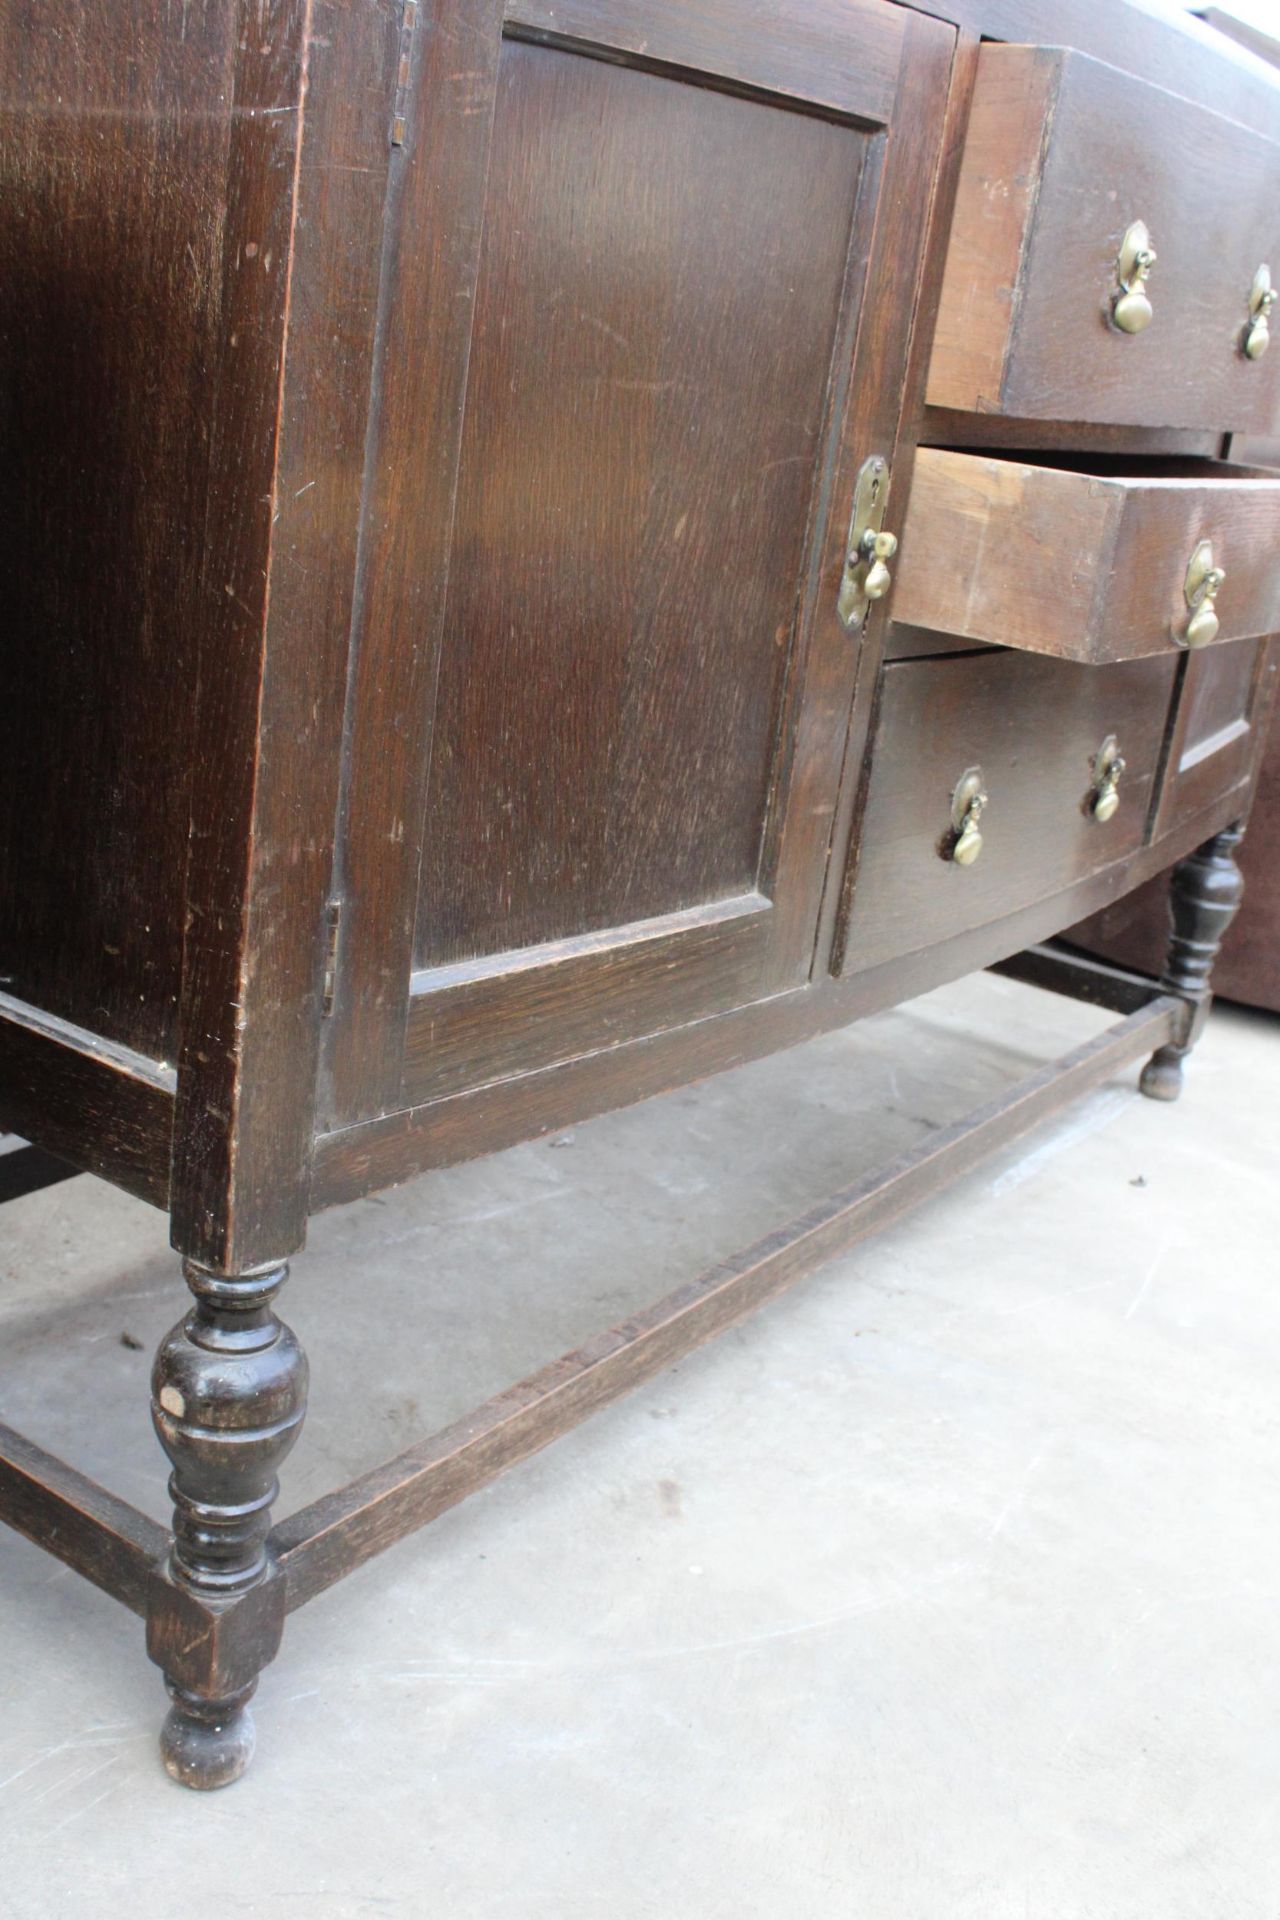 AN EARLY 20TH CENTURY OAK SIDEBOARD ON OPEN BASE WITH TURNED LEGS, 54" WIDE - Image 3 of 4